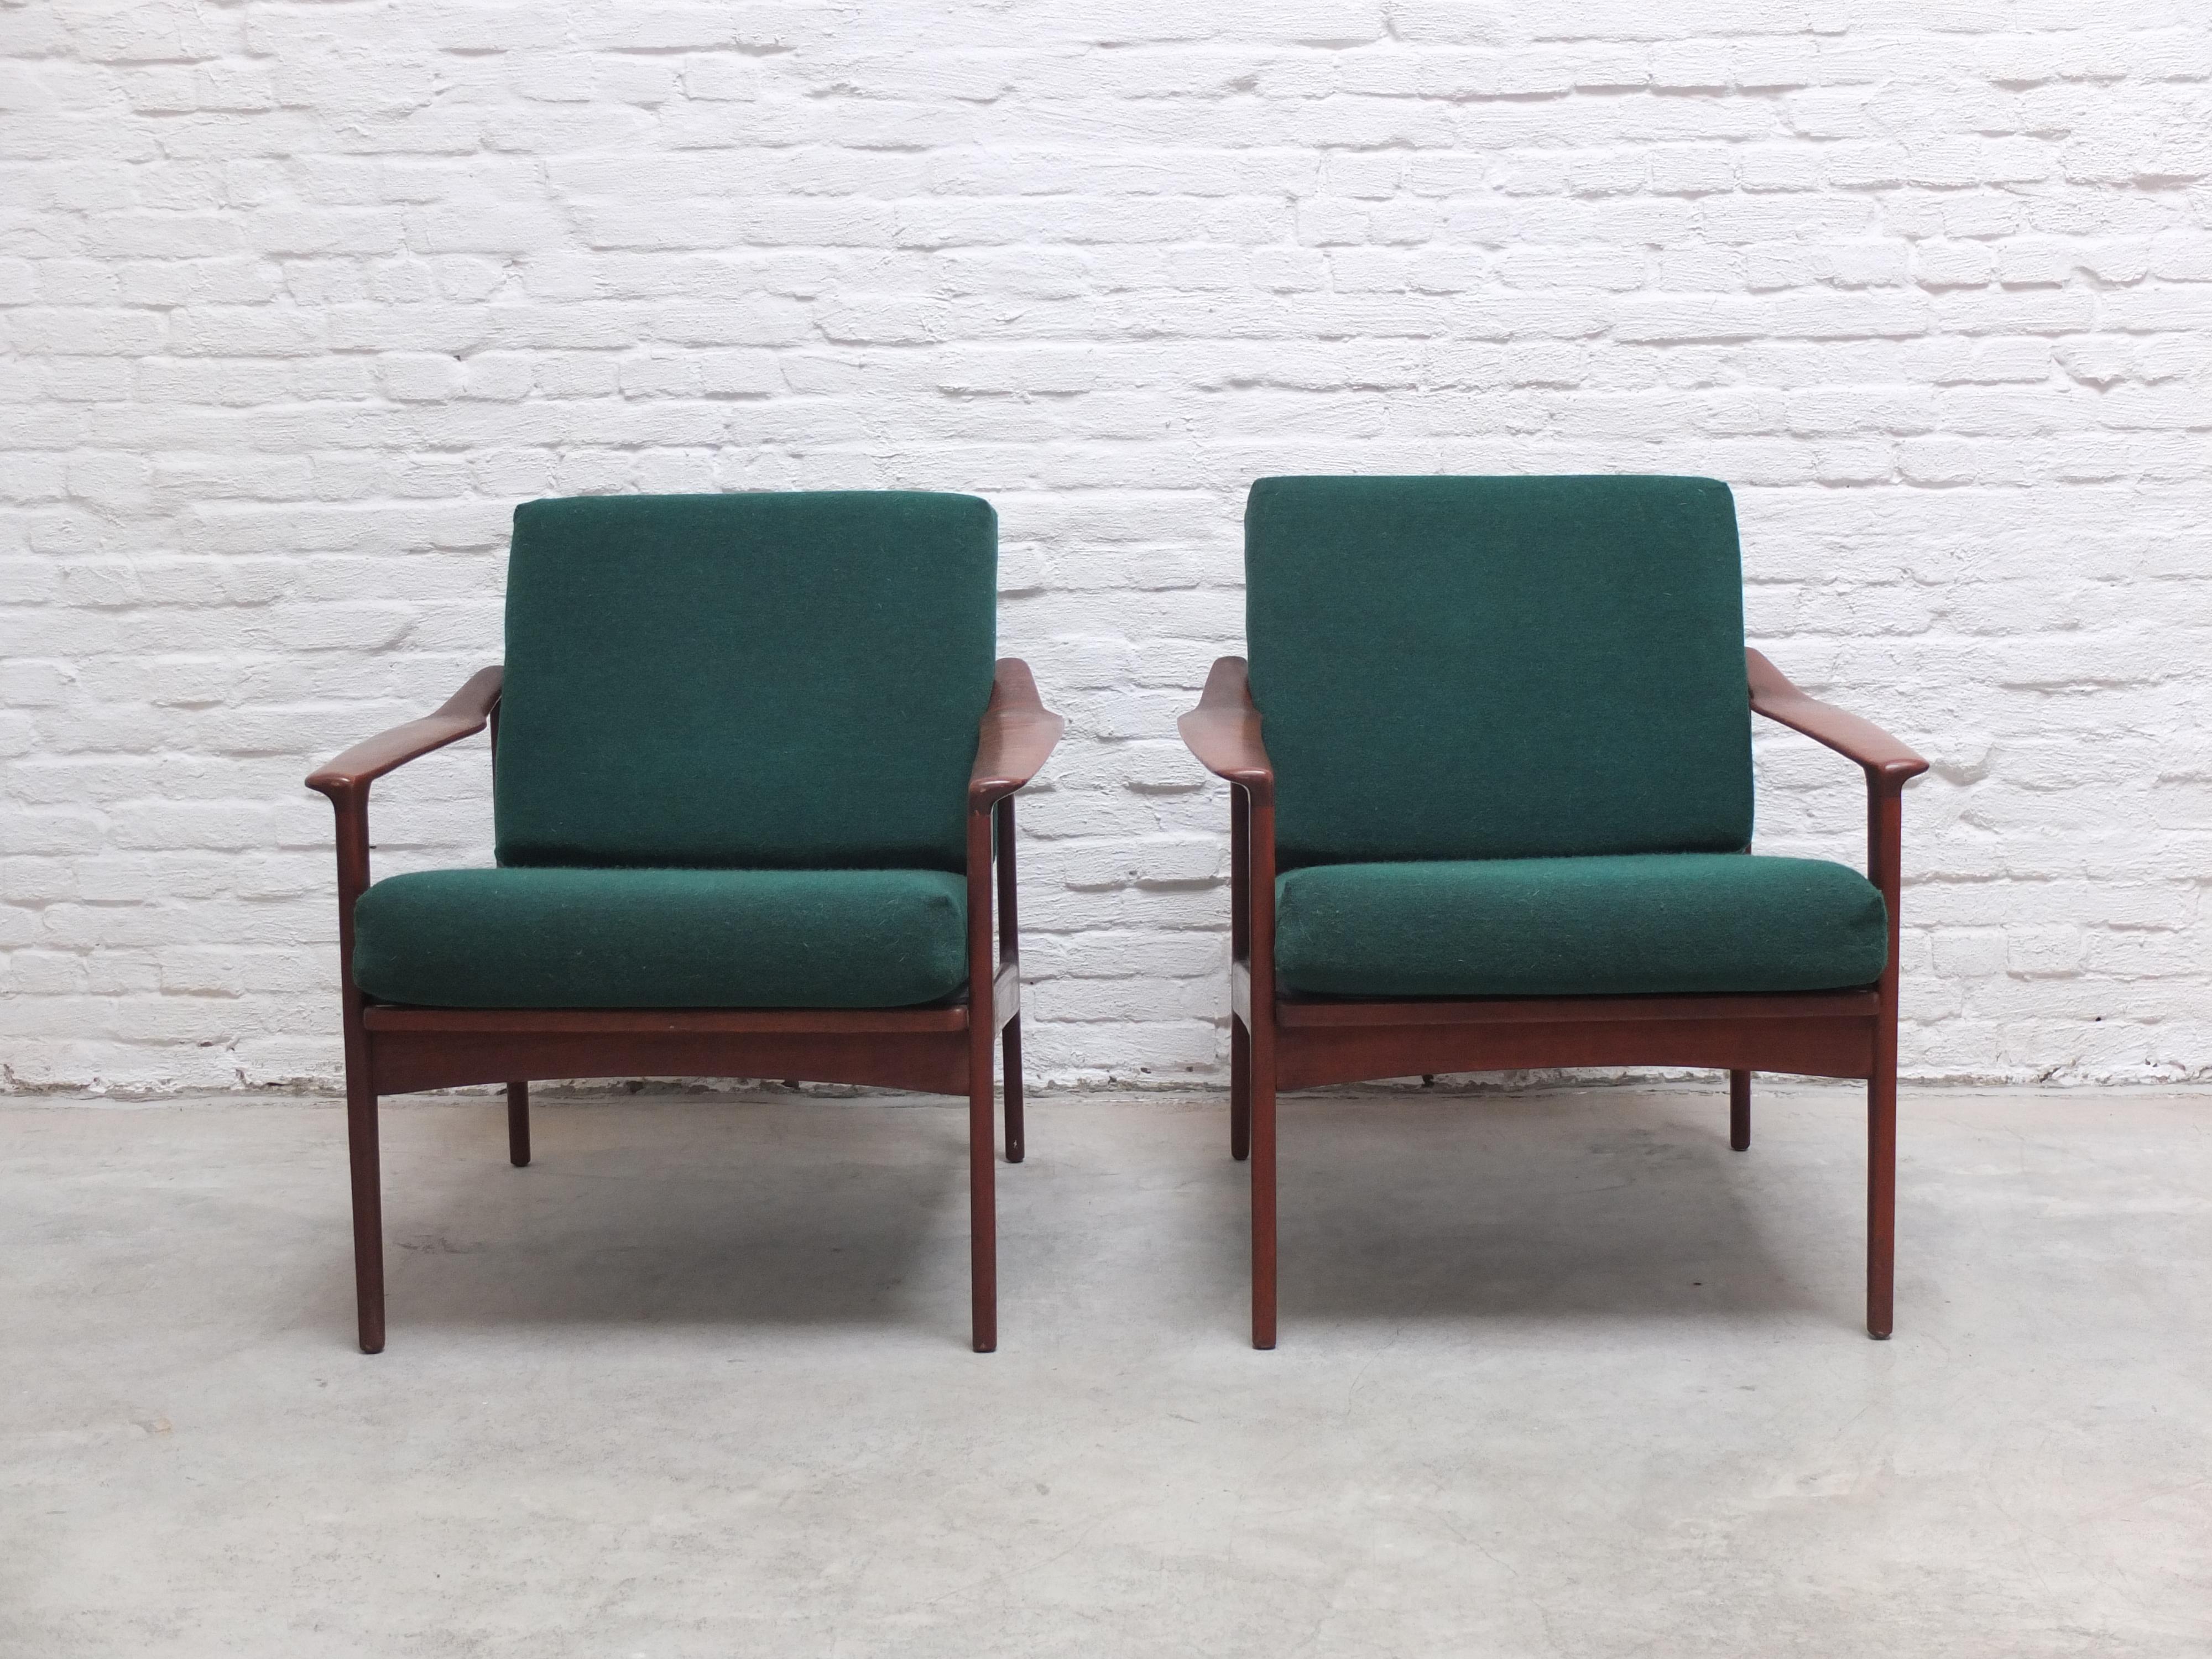 Lovely pair of easy chairs designed by Ib-Kofod Larsen for Selig during the 1960s. These elegant chairs have solid teak frames with beautiful sculptural armrests and brass joints. The forest green cushions have been refilled with new foam. In very